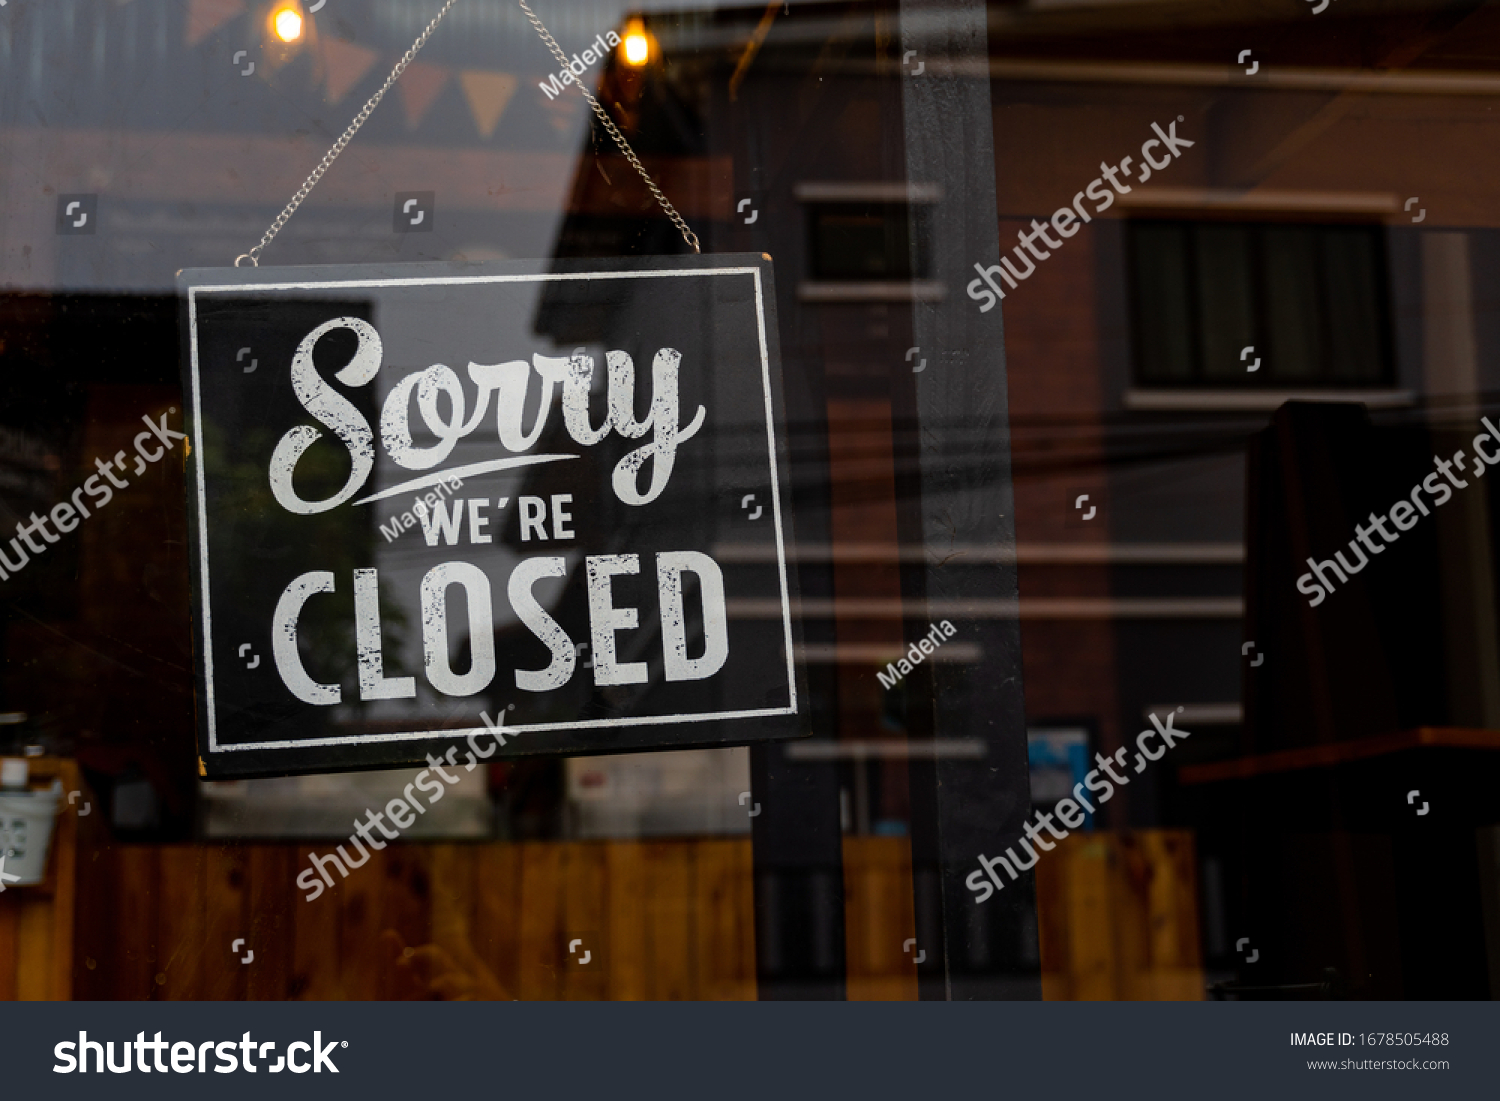 Sorry we're closed . vintage black and white retro sign on a coffee glass door #1678505488